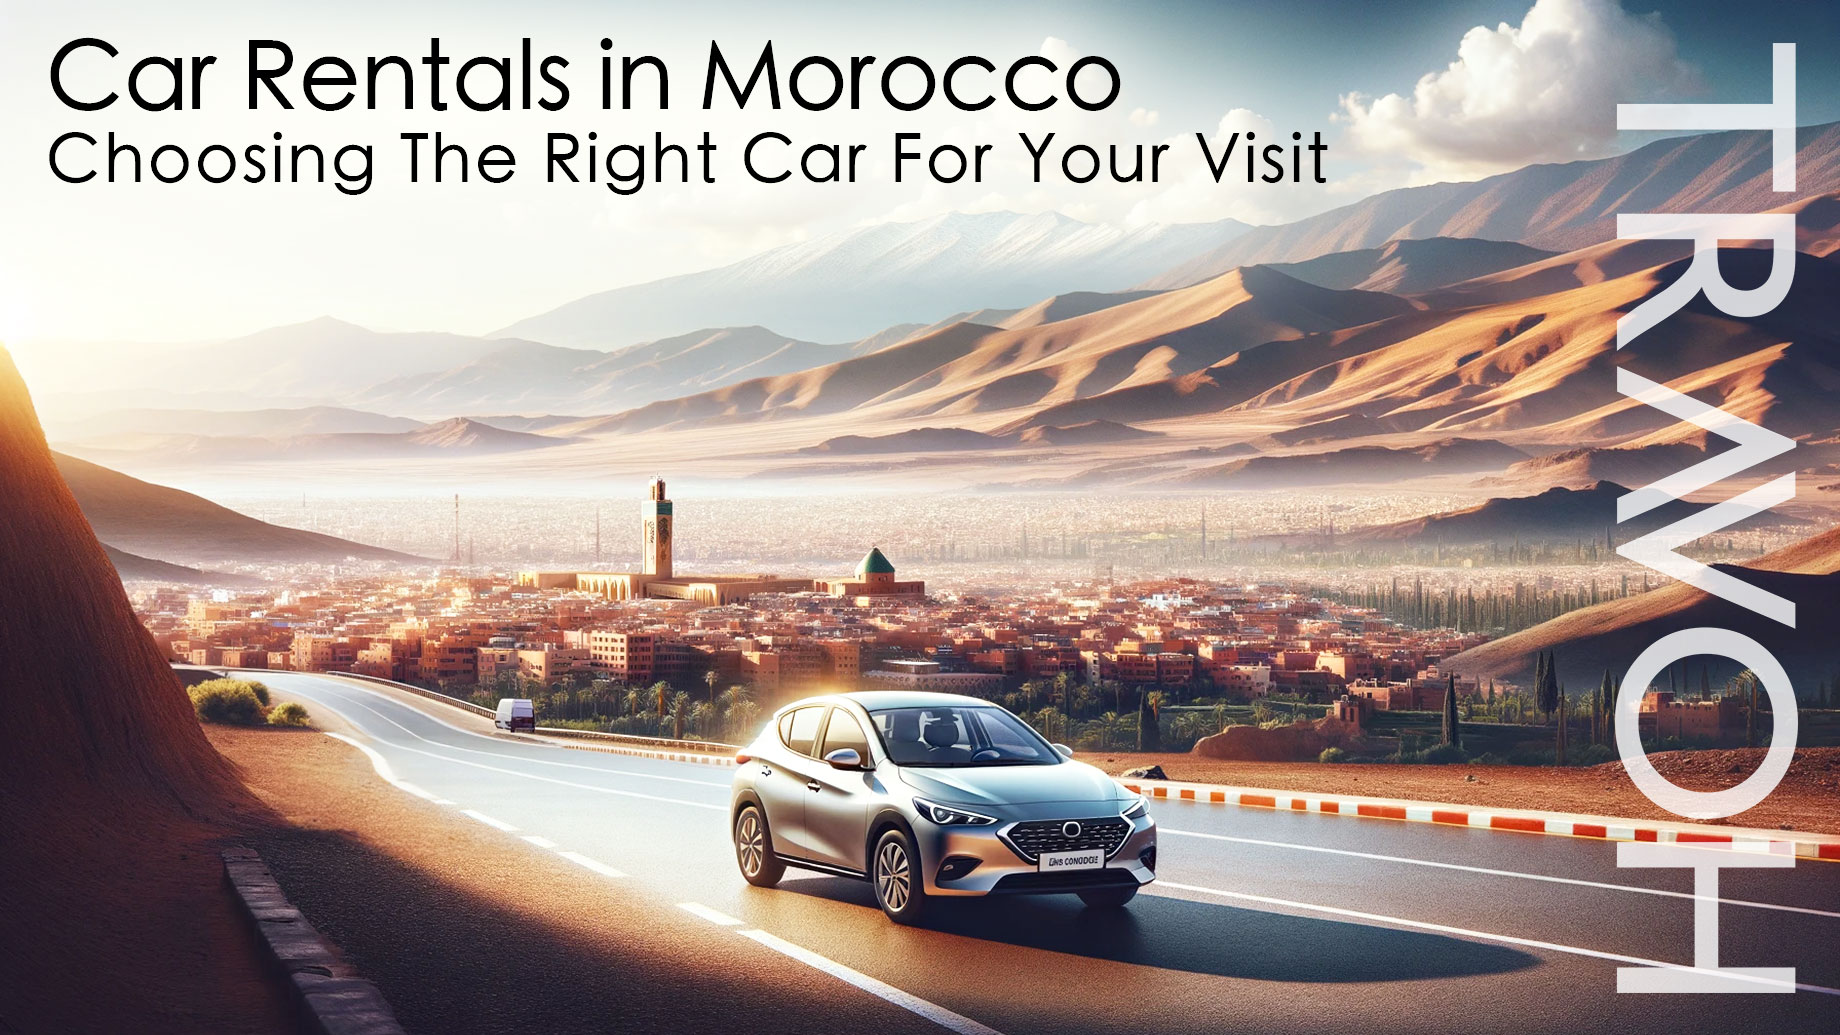 Car Rentals in Morocco: Choosing The Right Car For Your Visit